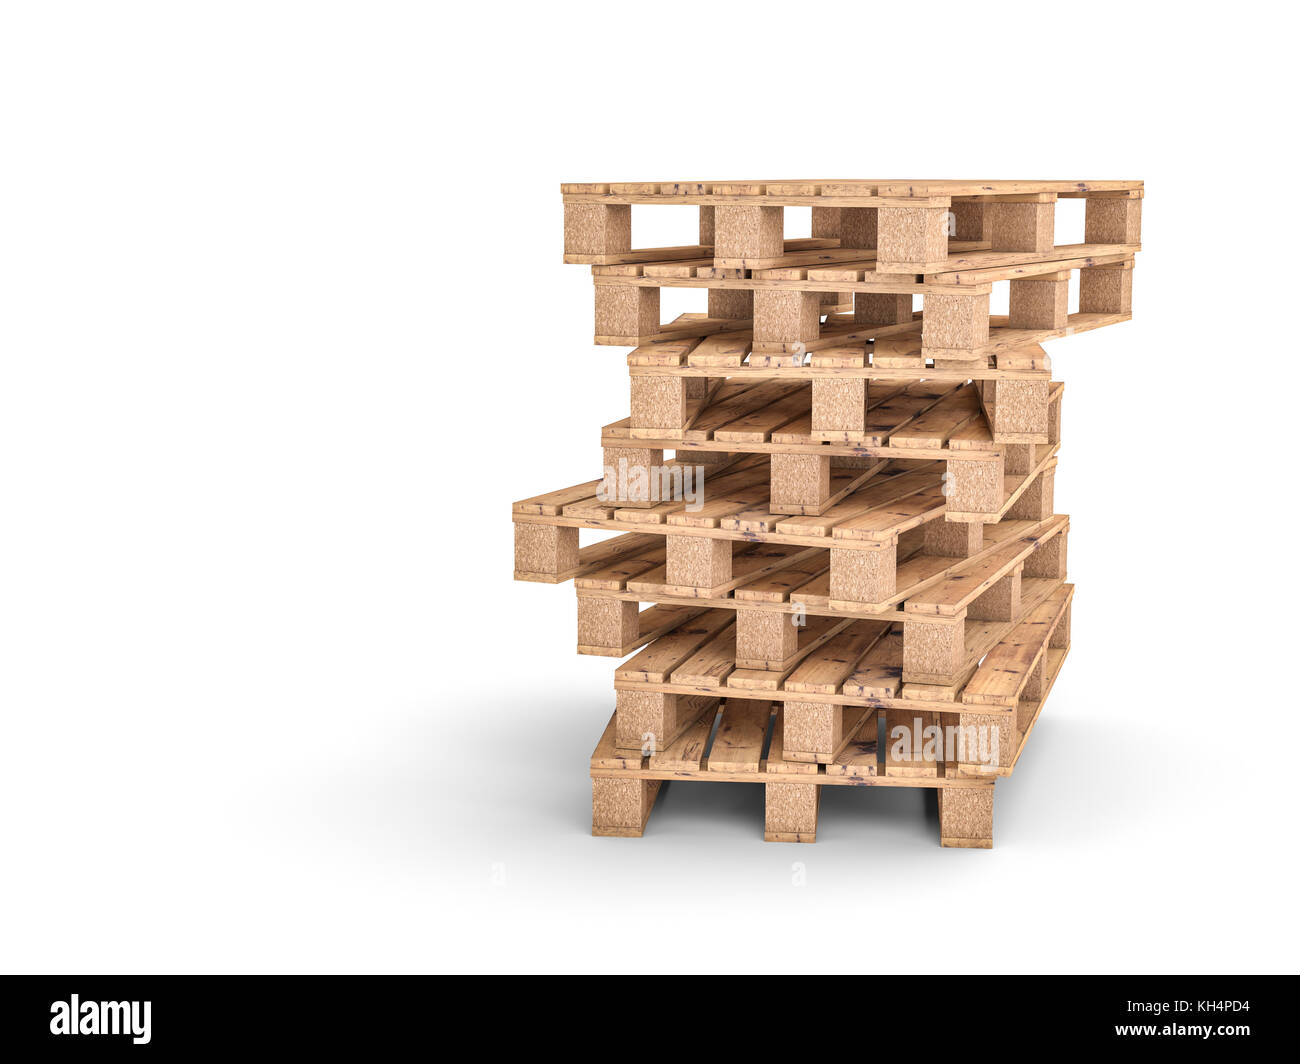 wood pallet on white 3d rendering image Stock Photo